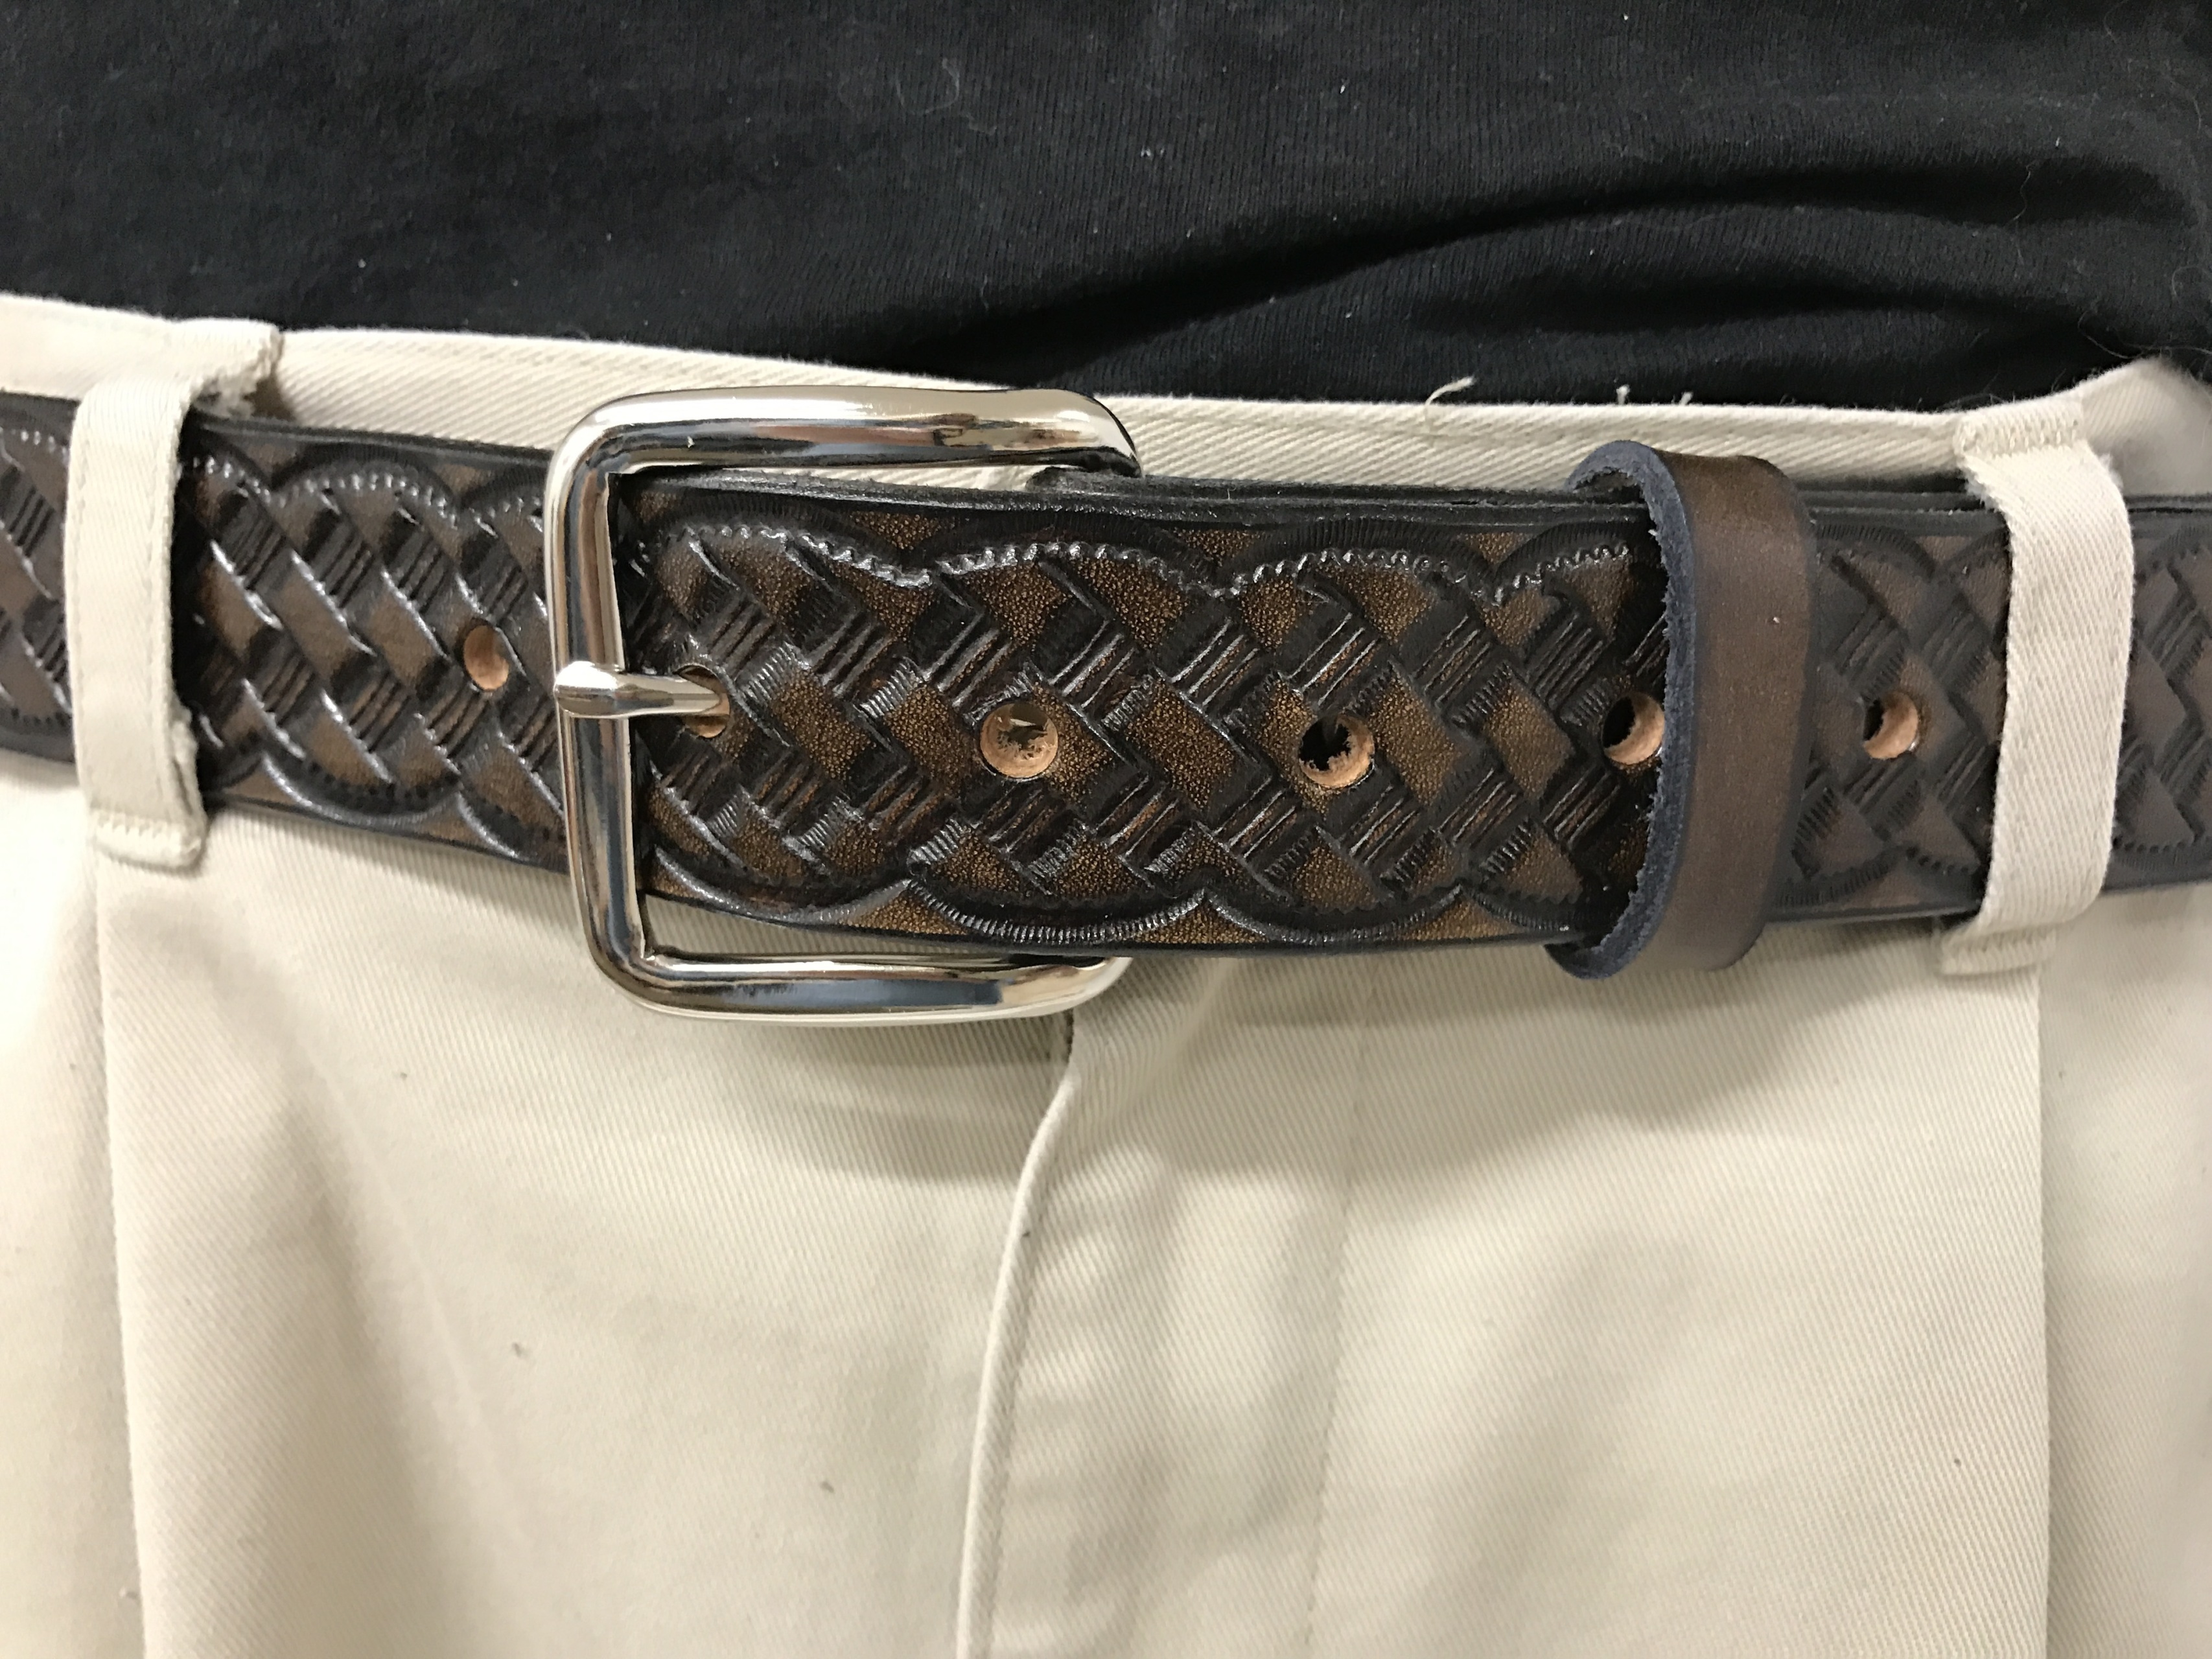 Full Basket Weave Design Handmade Mens Leather Belt 1.5&quot; wide Work Casual Western Color Cocoa Brown